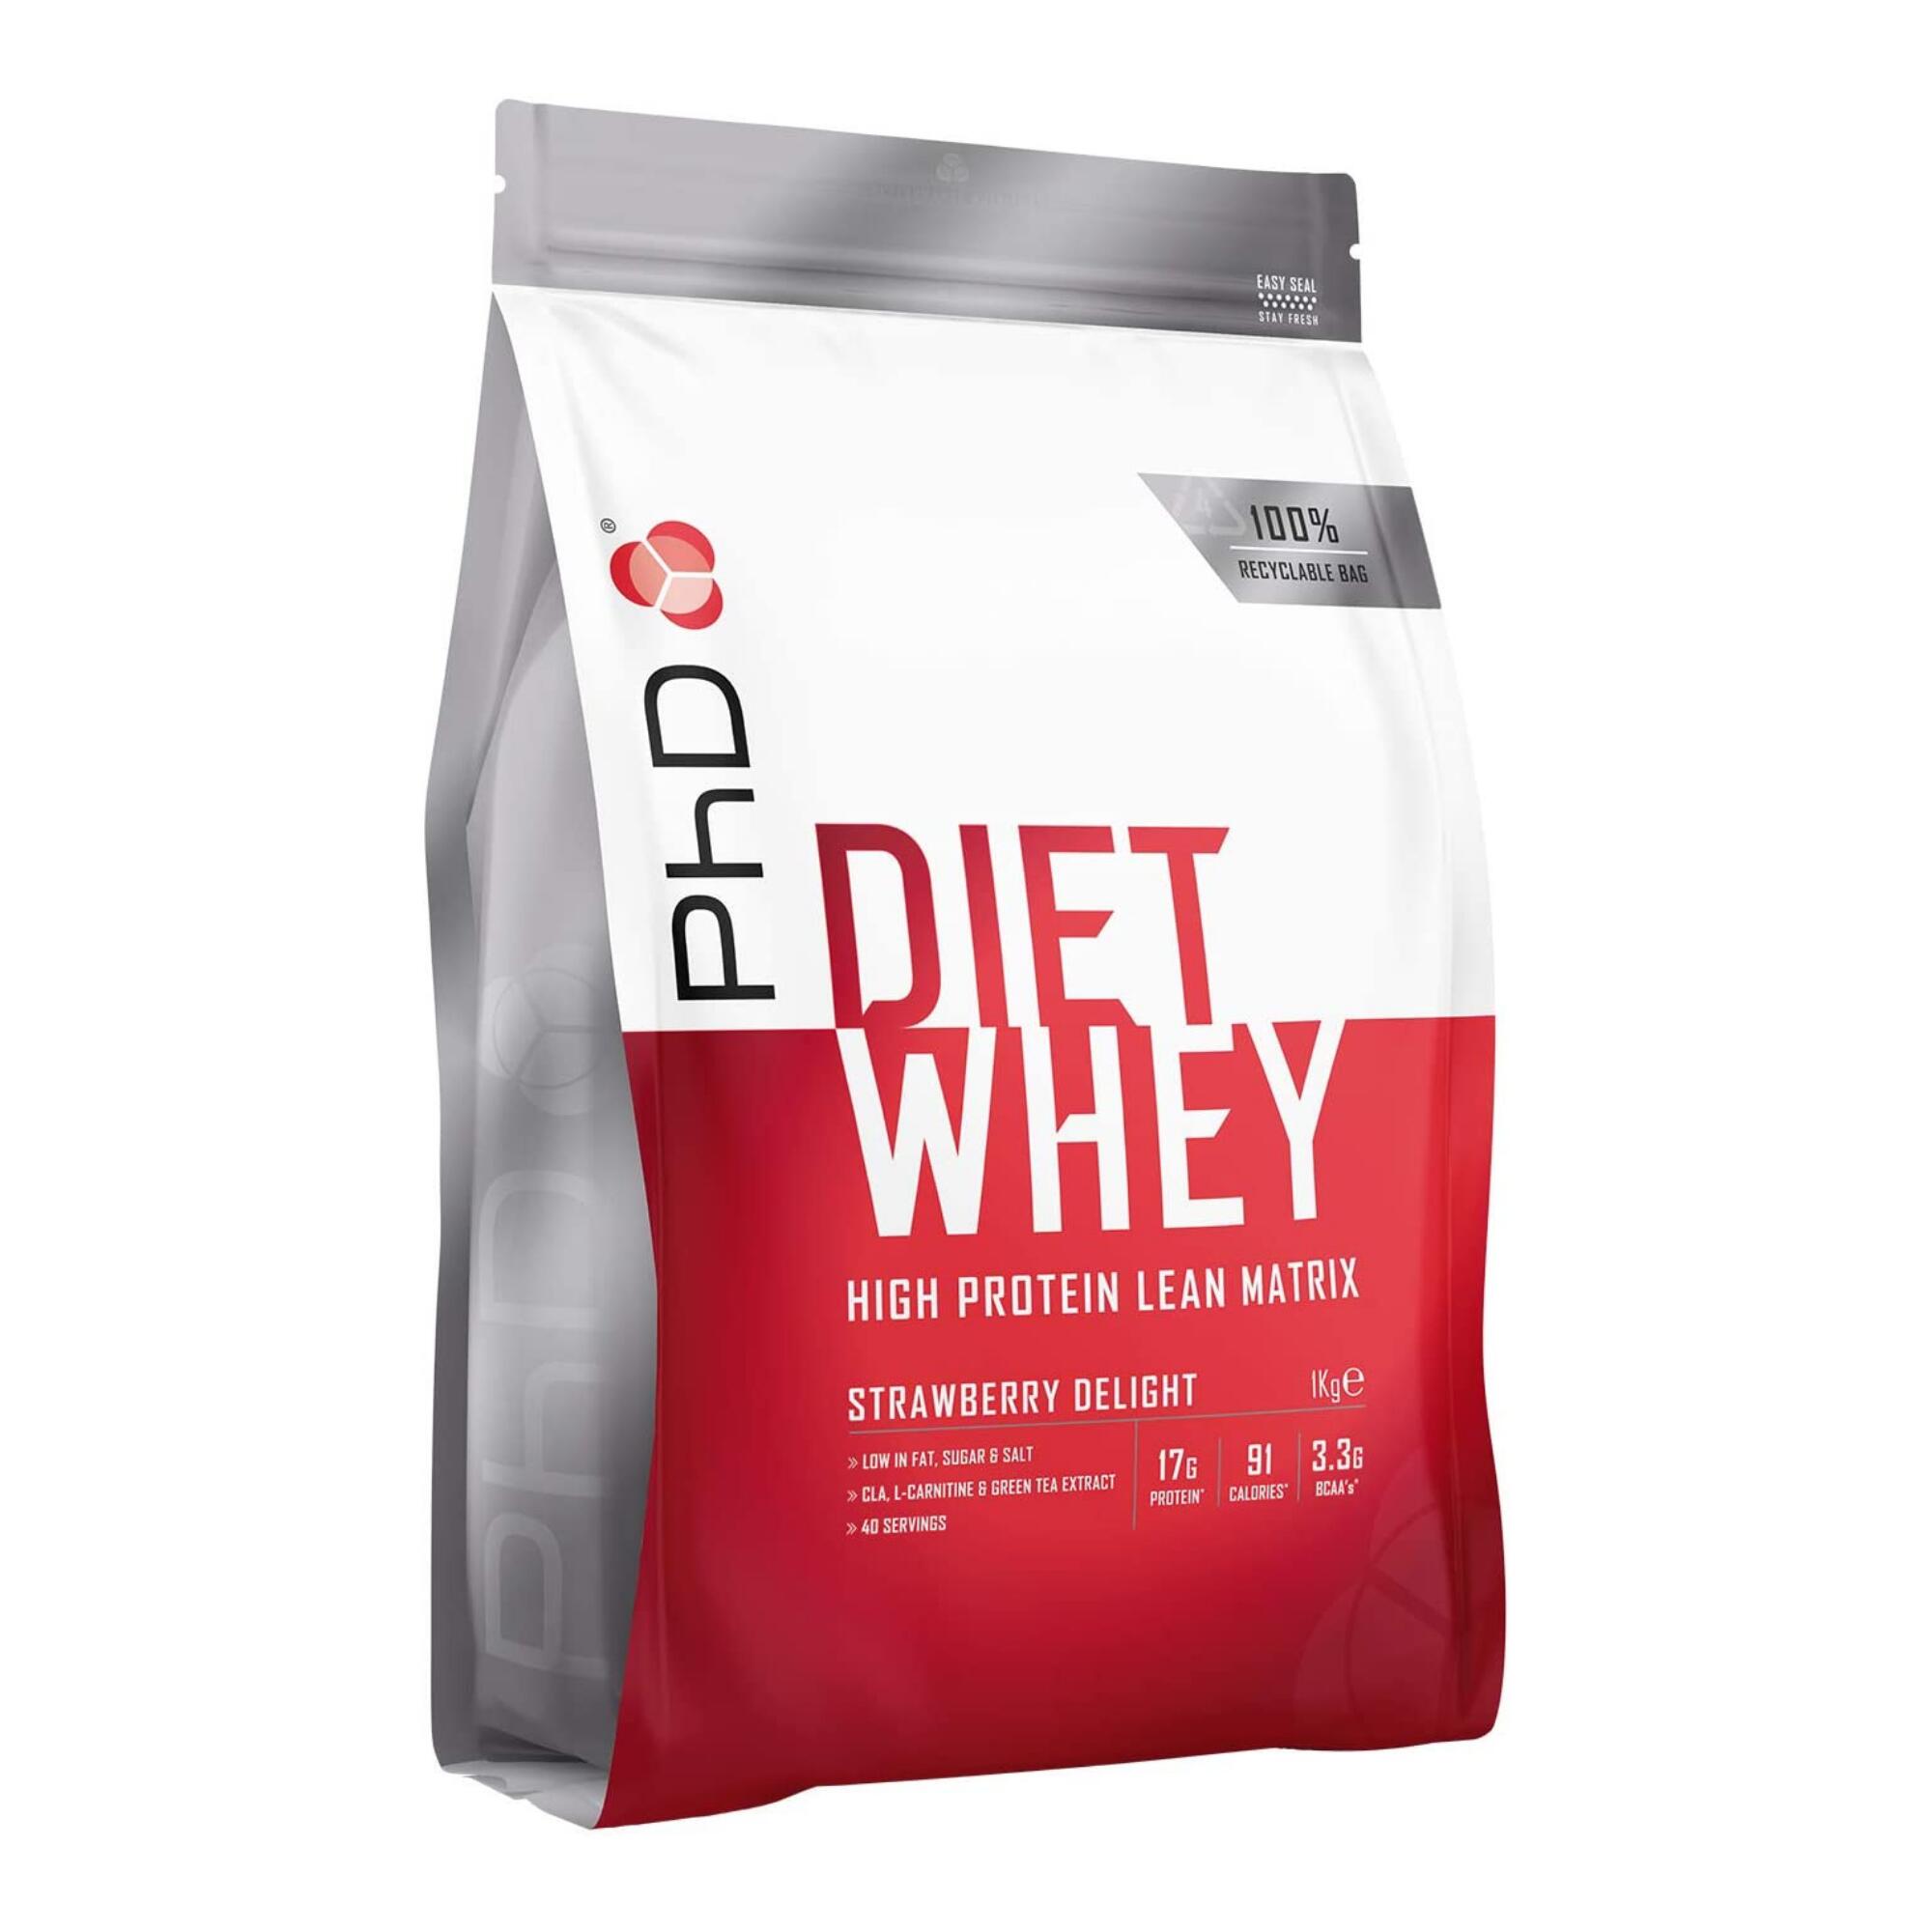 phd diet whey nutritional information